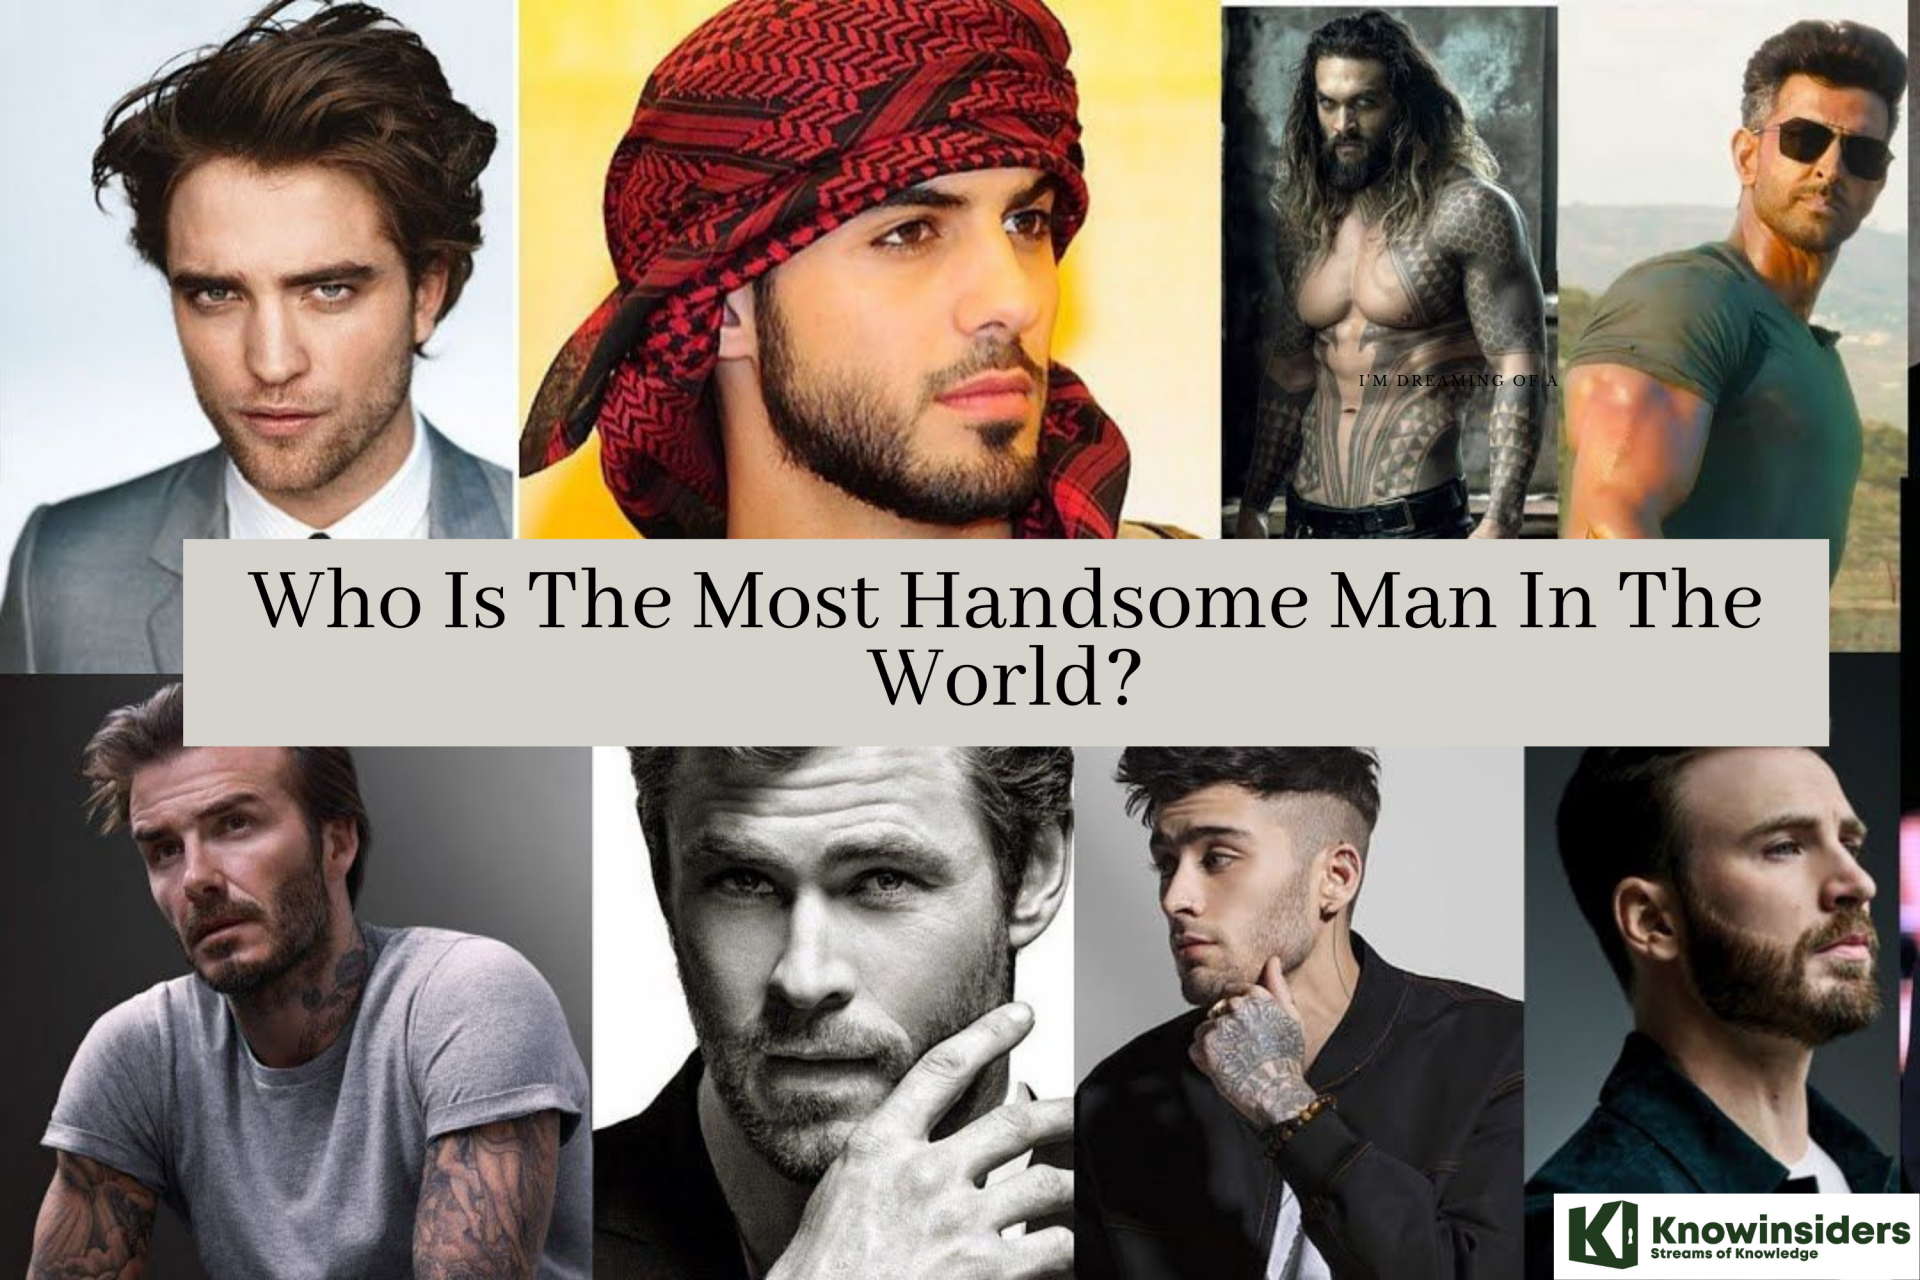 Who Is The World's Most Handsome Man According To Science?